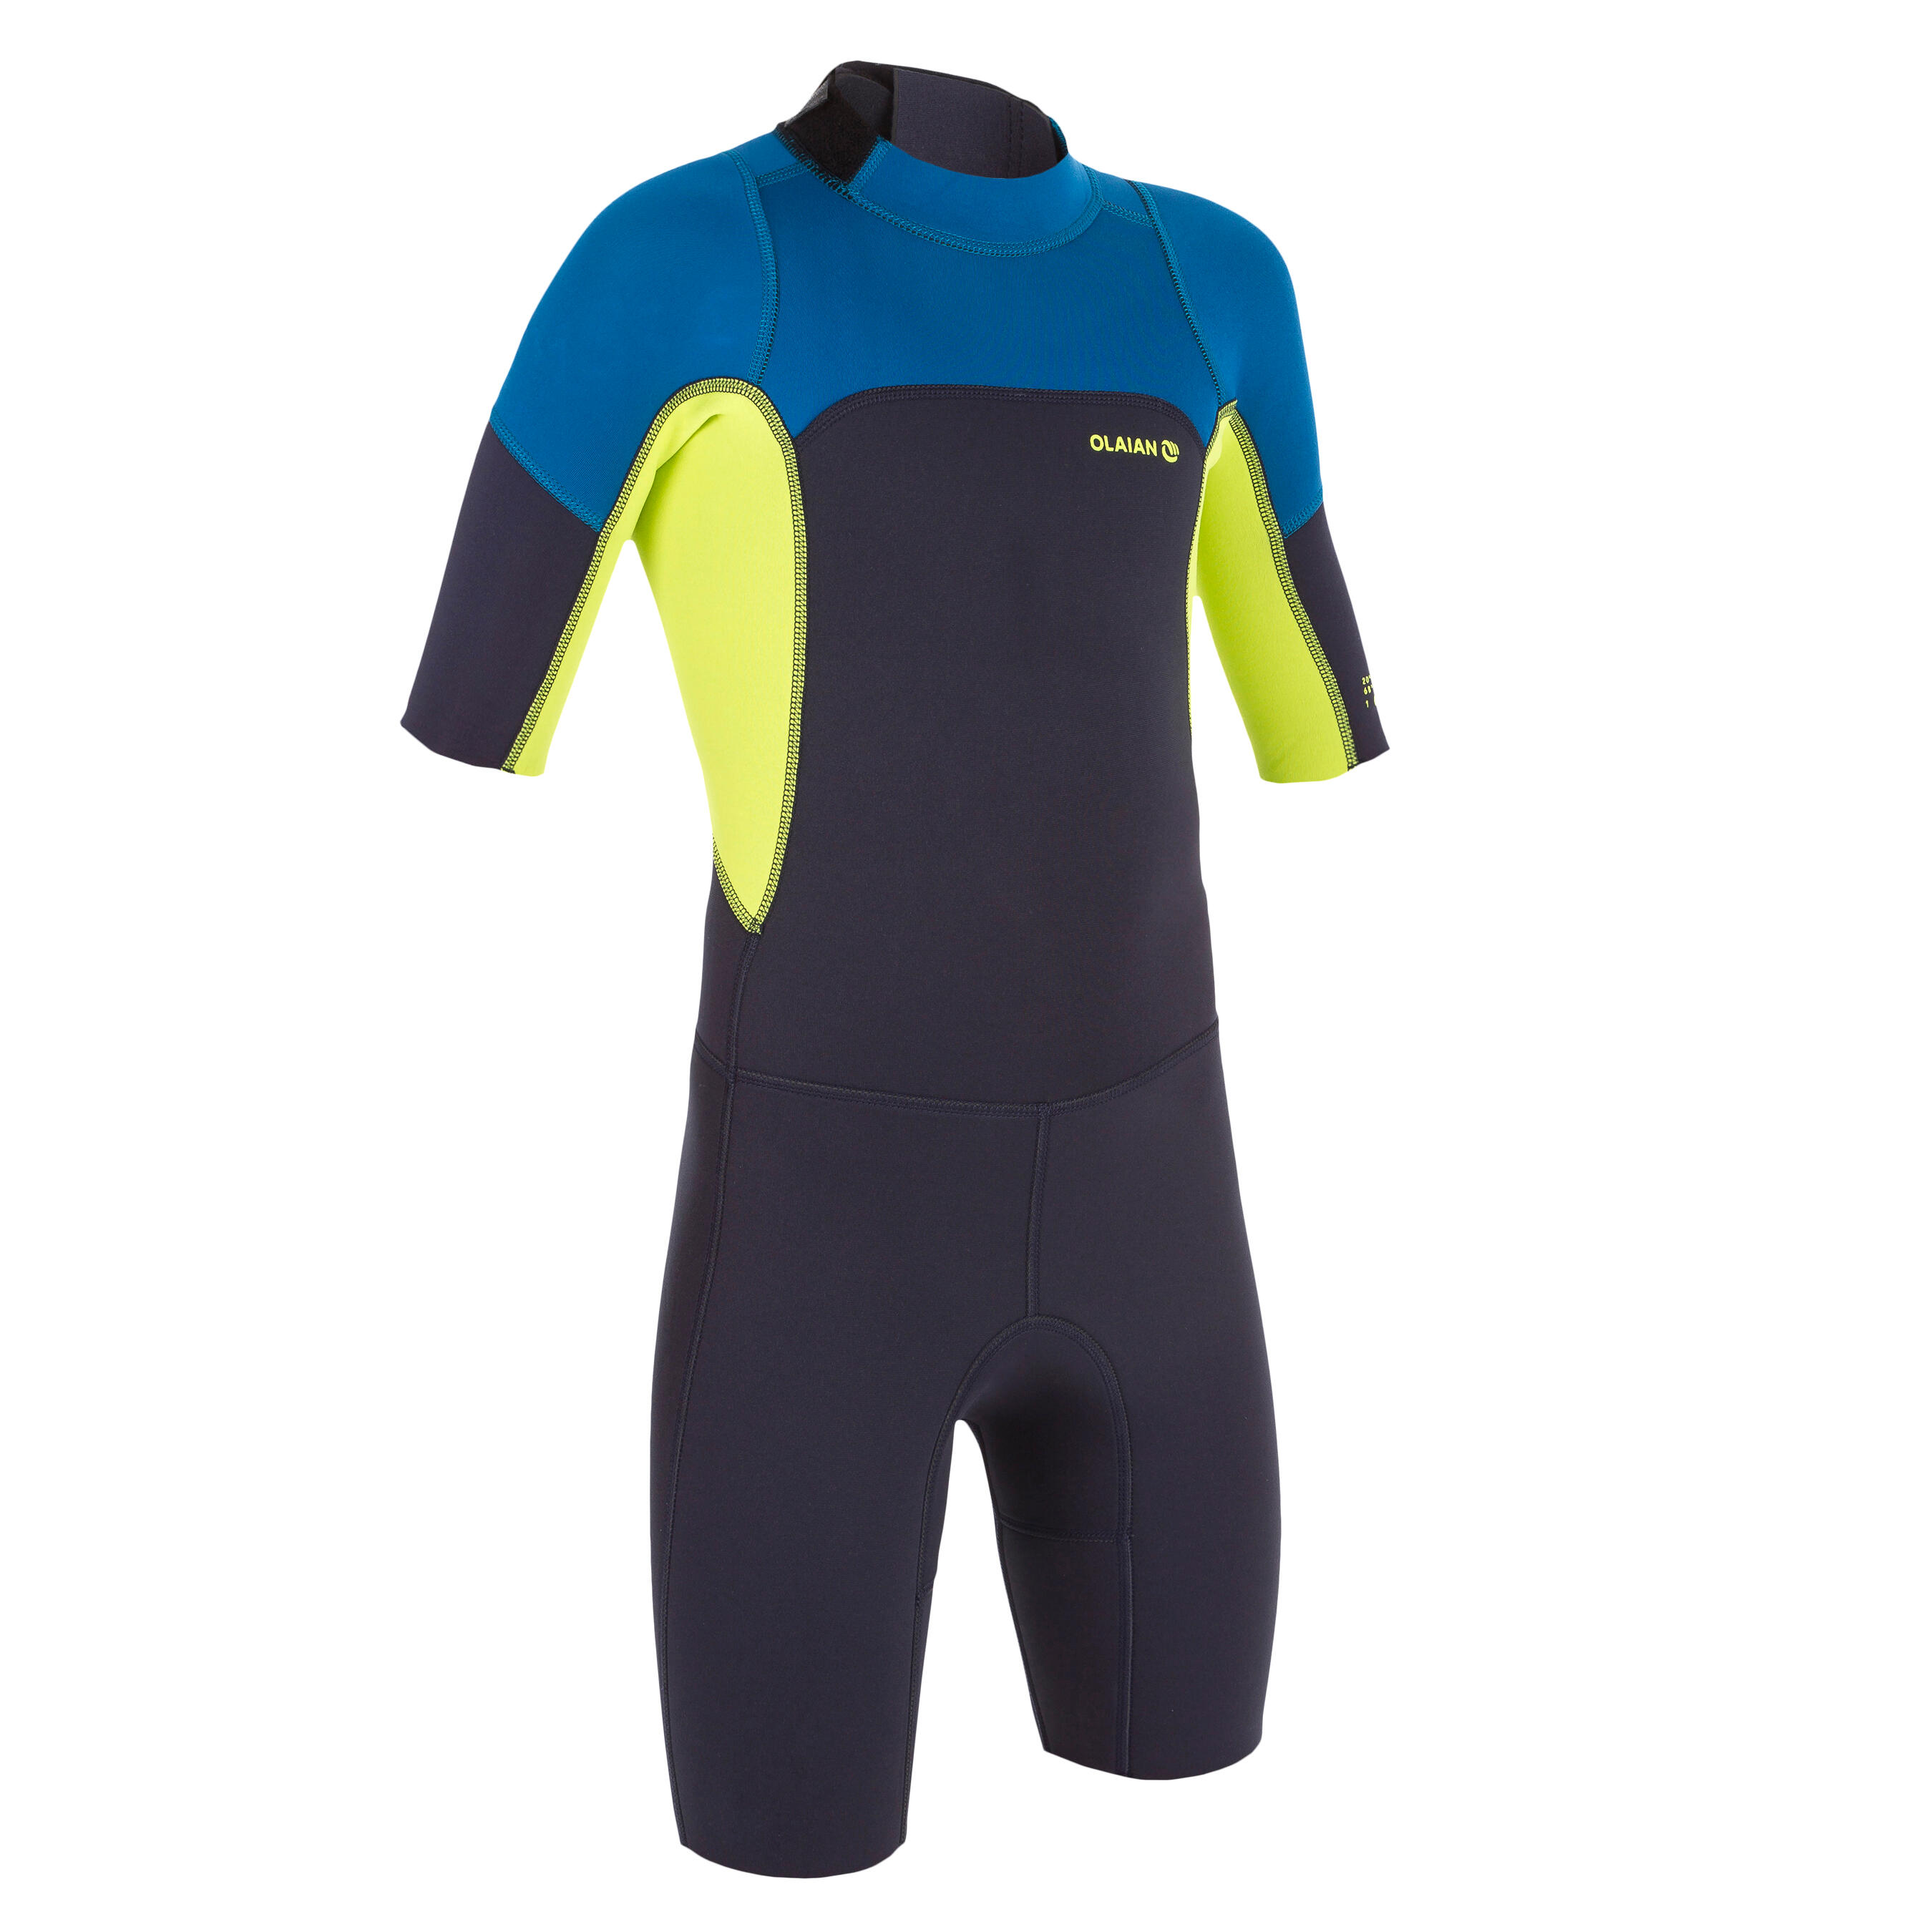 OLAIAN 500 child's 2mm stretch neoprene navy blue yellow Shorty Surfing wetsuit